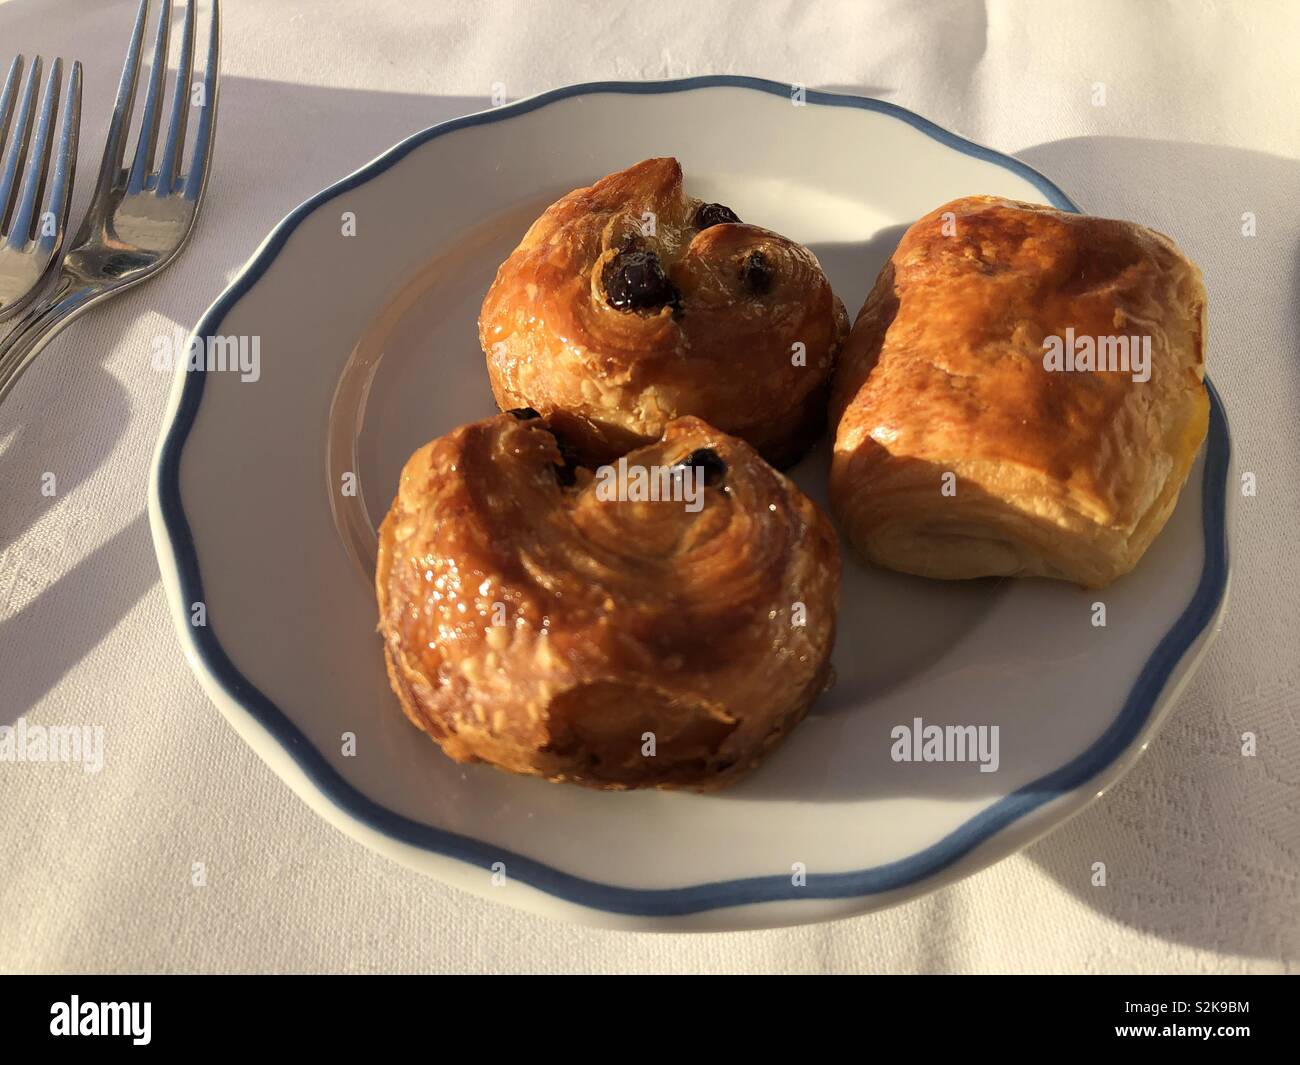 Pastries on s plate Stock Photo